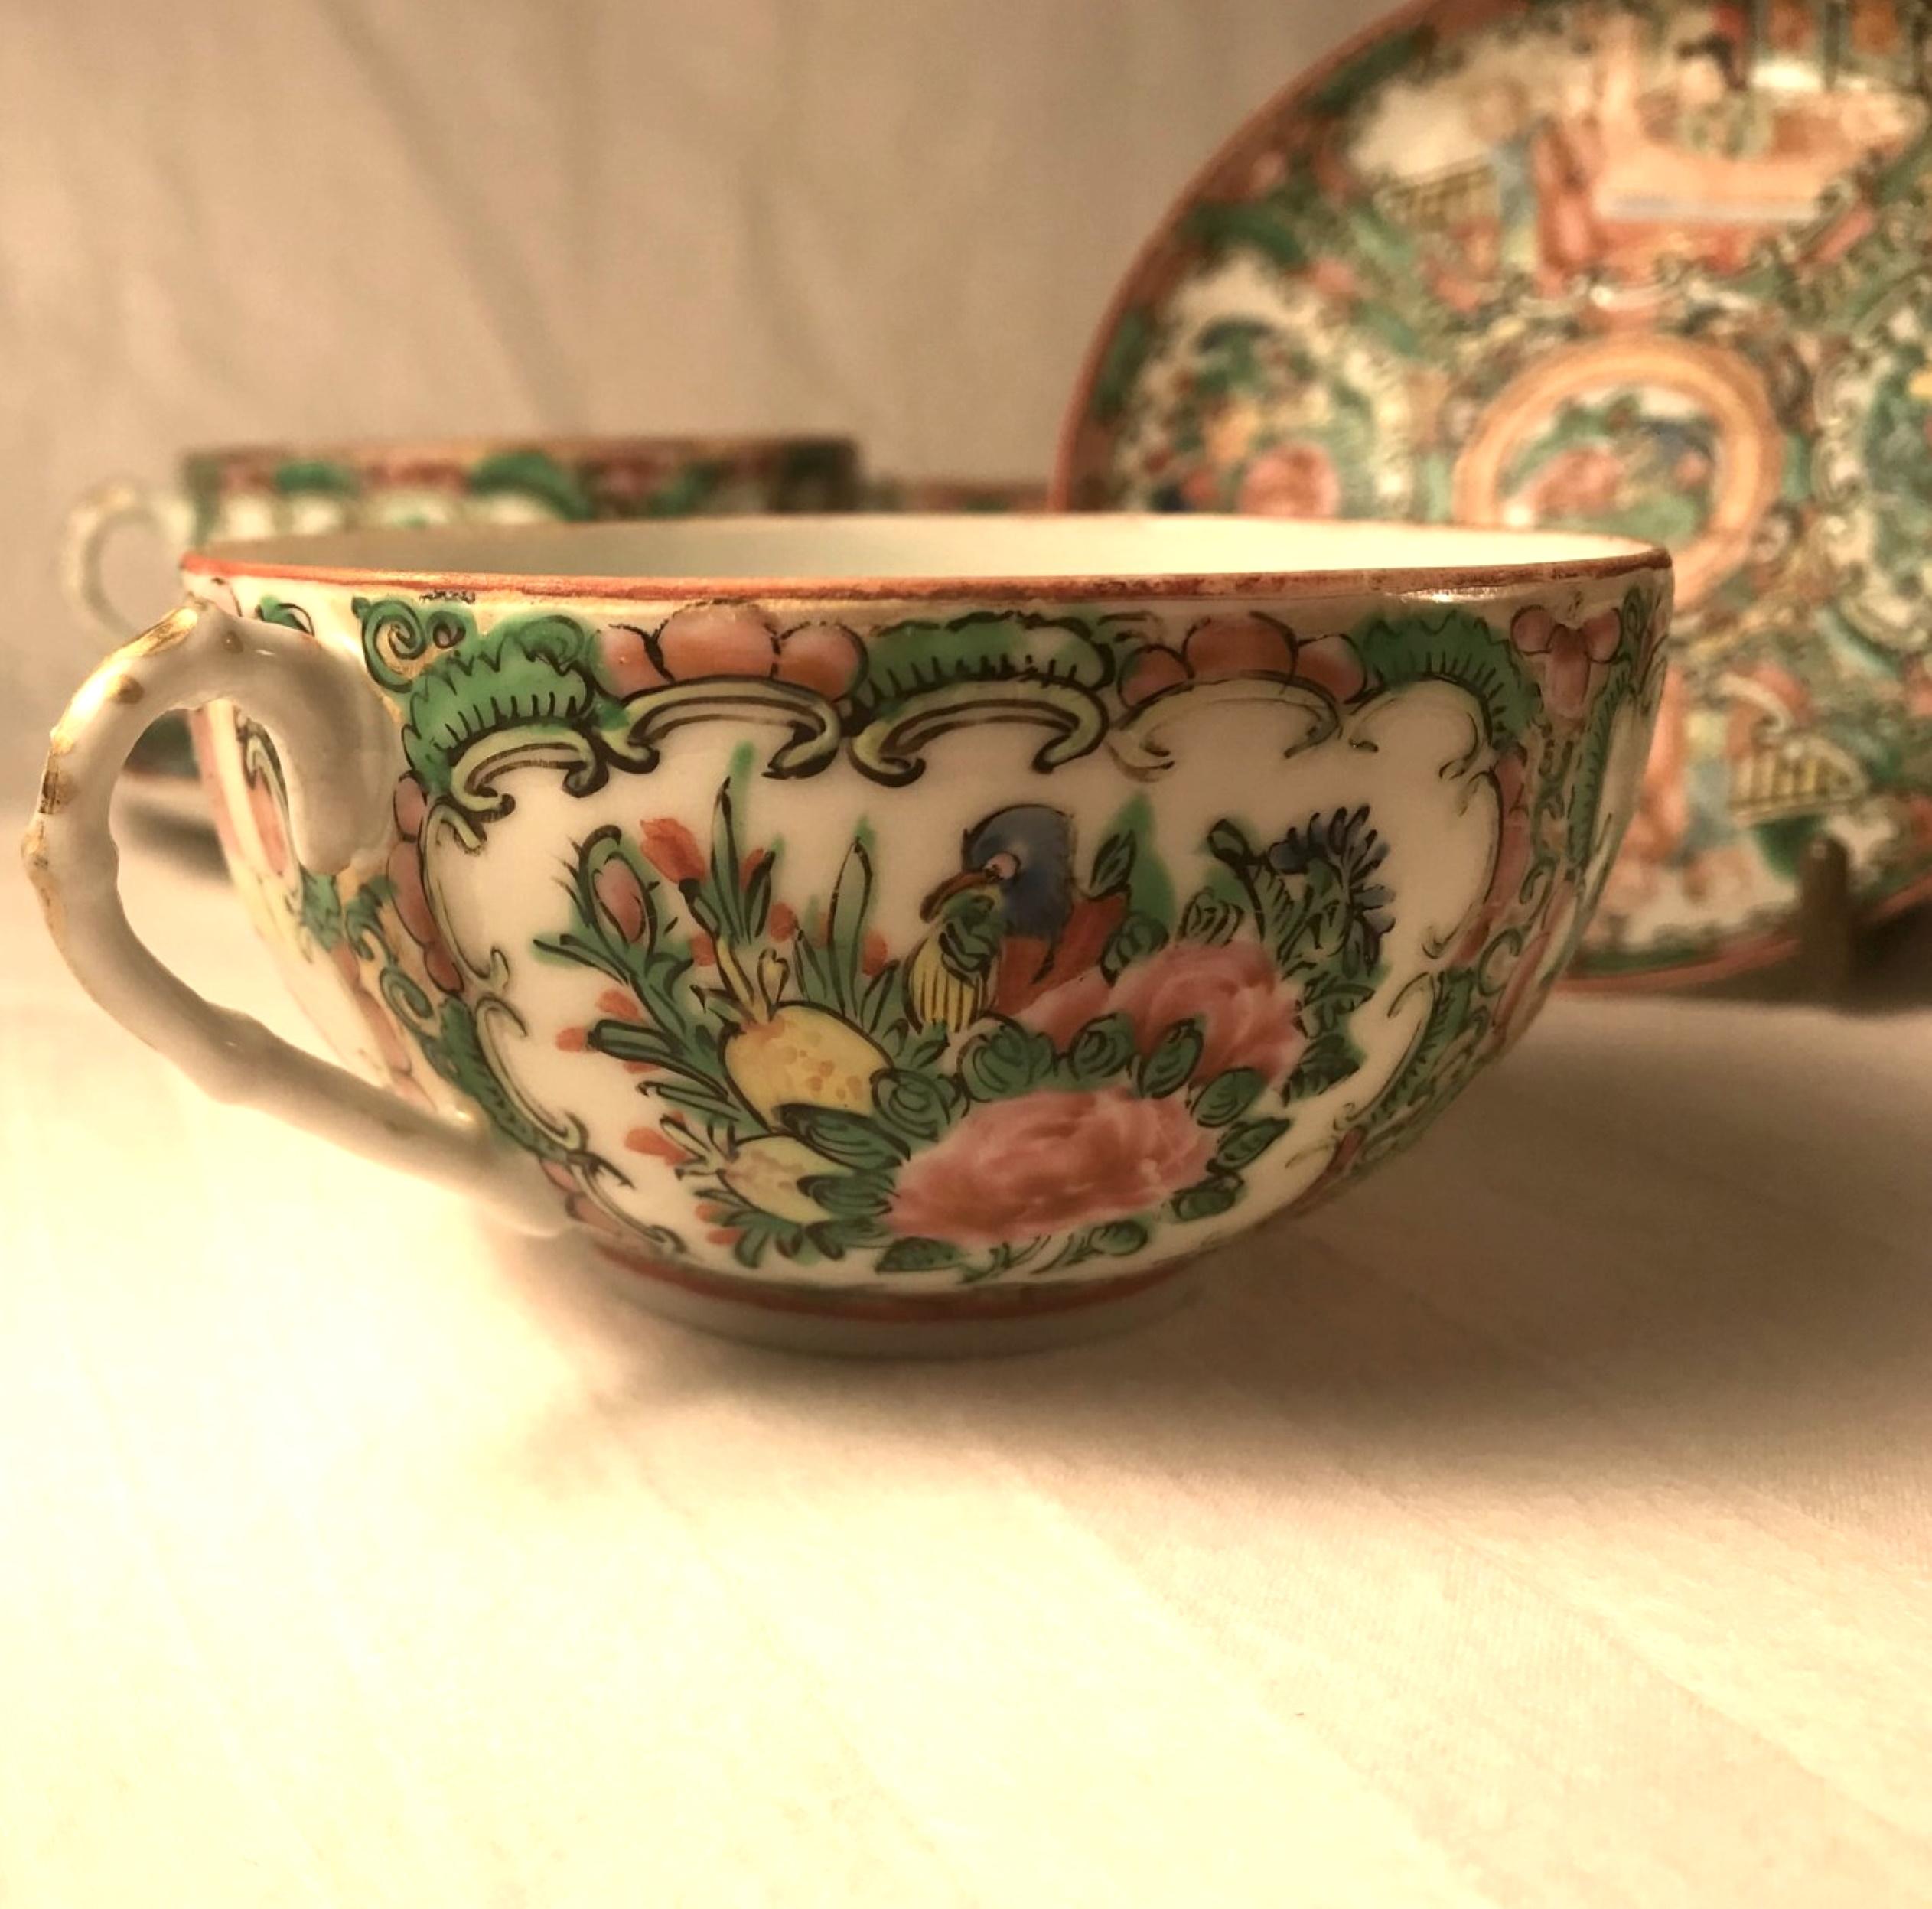 9 set antique 1850s Chinese rose medallion square eggshell porcelain tea cups and saucers.

Beautiful set of 9 antique Chinese rose medallion porcelain tea cups and saucers
from the Qing Dynasty. Saucers are in a soft square shape with matching